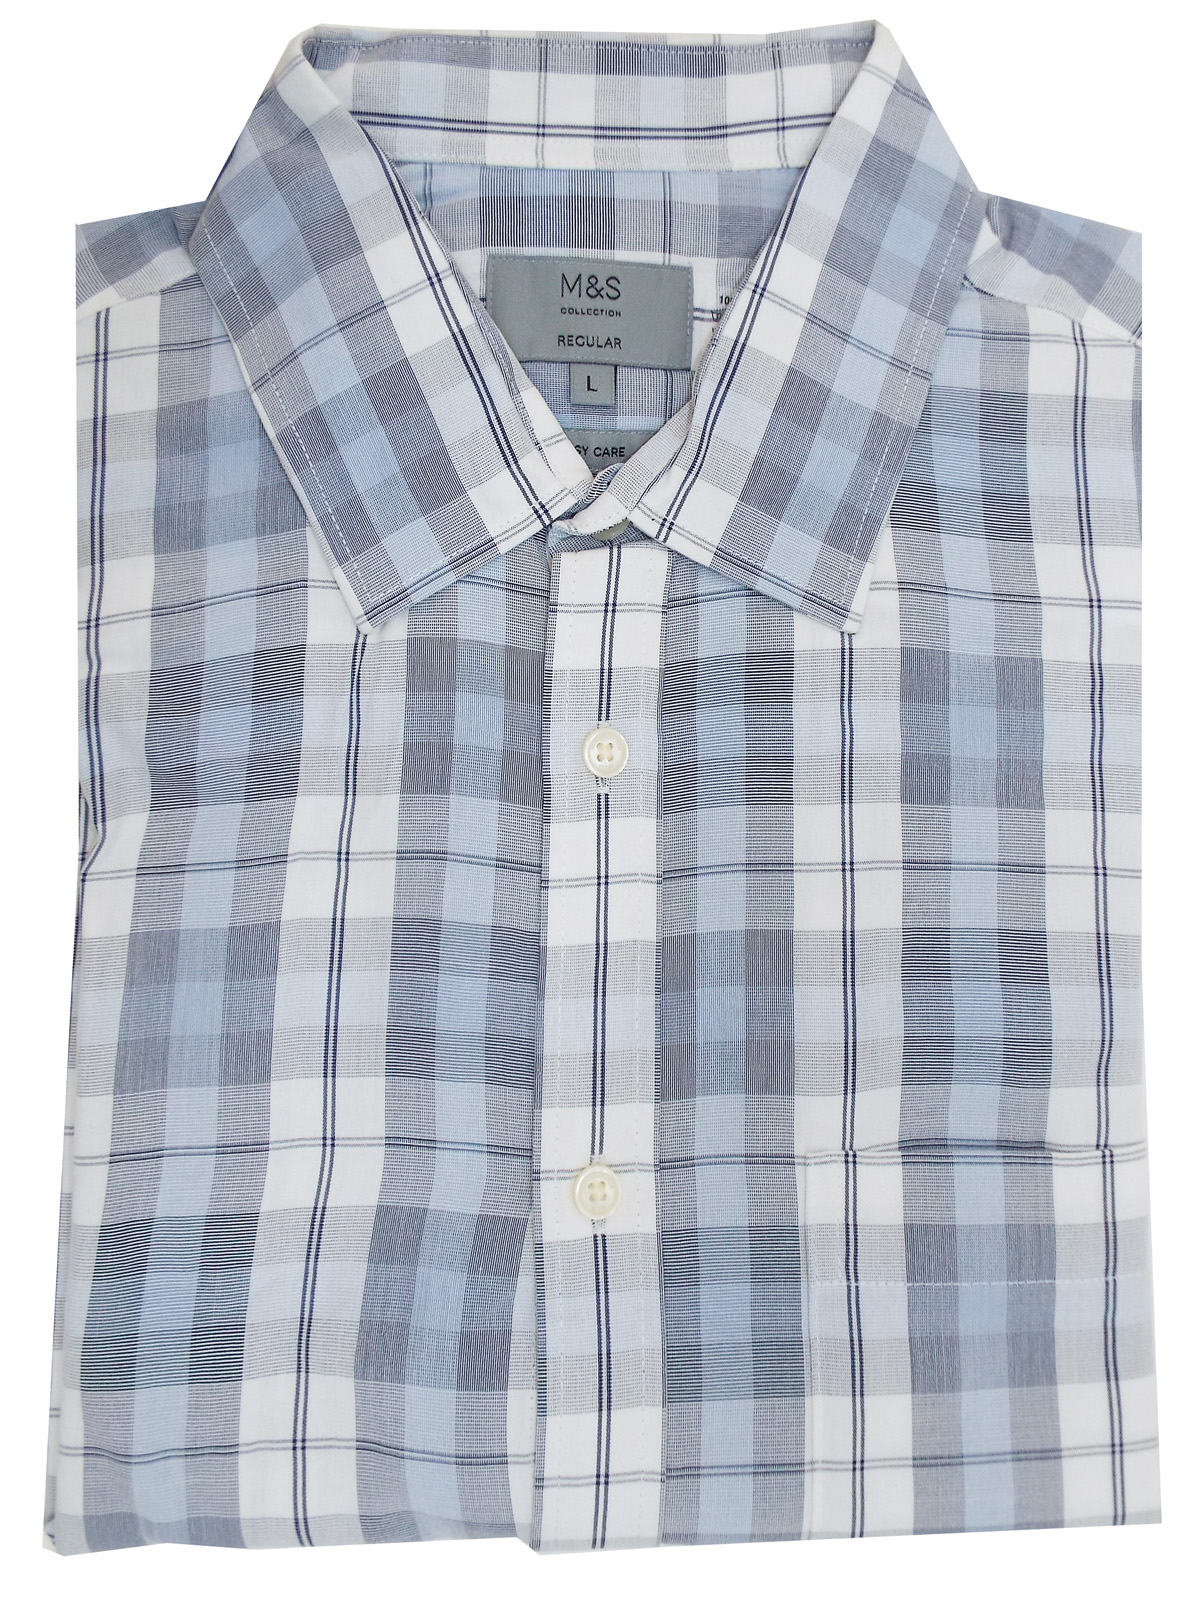 Marks and Spencer - - M&5 WHITE Mens Pure Cotton Checked Short Sleeve ...